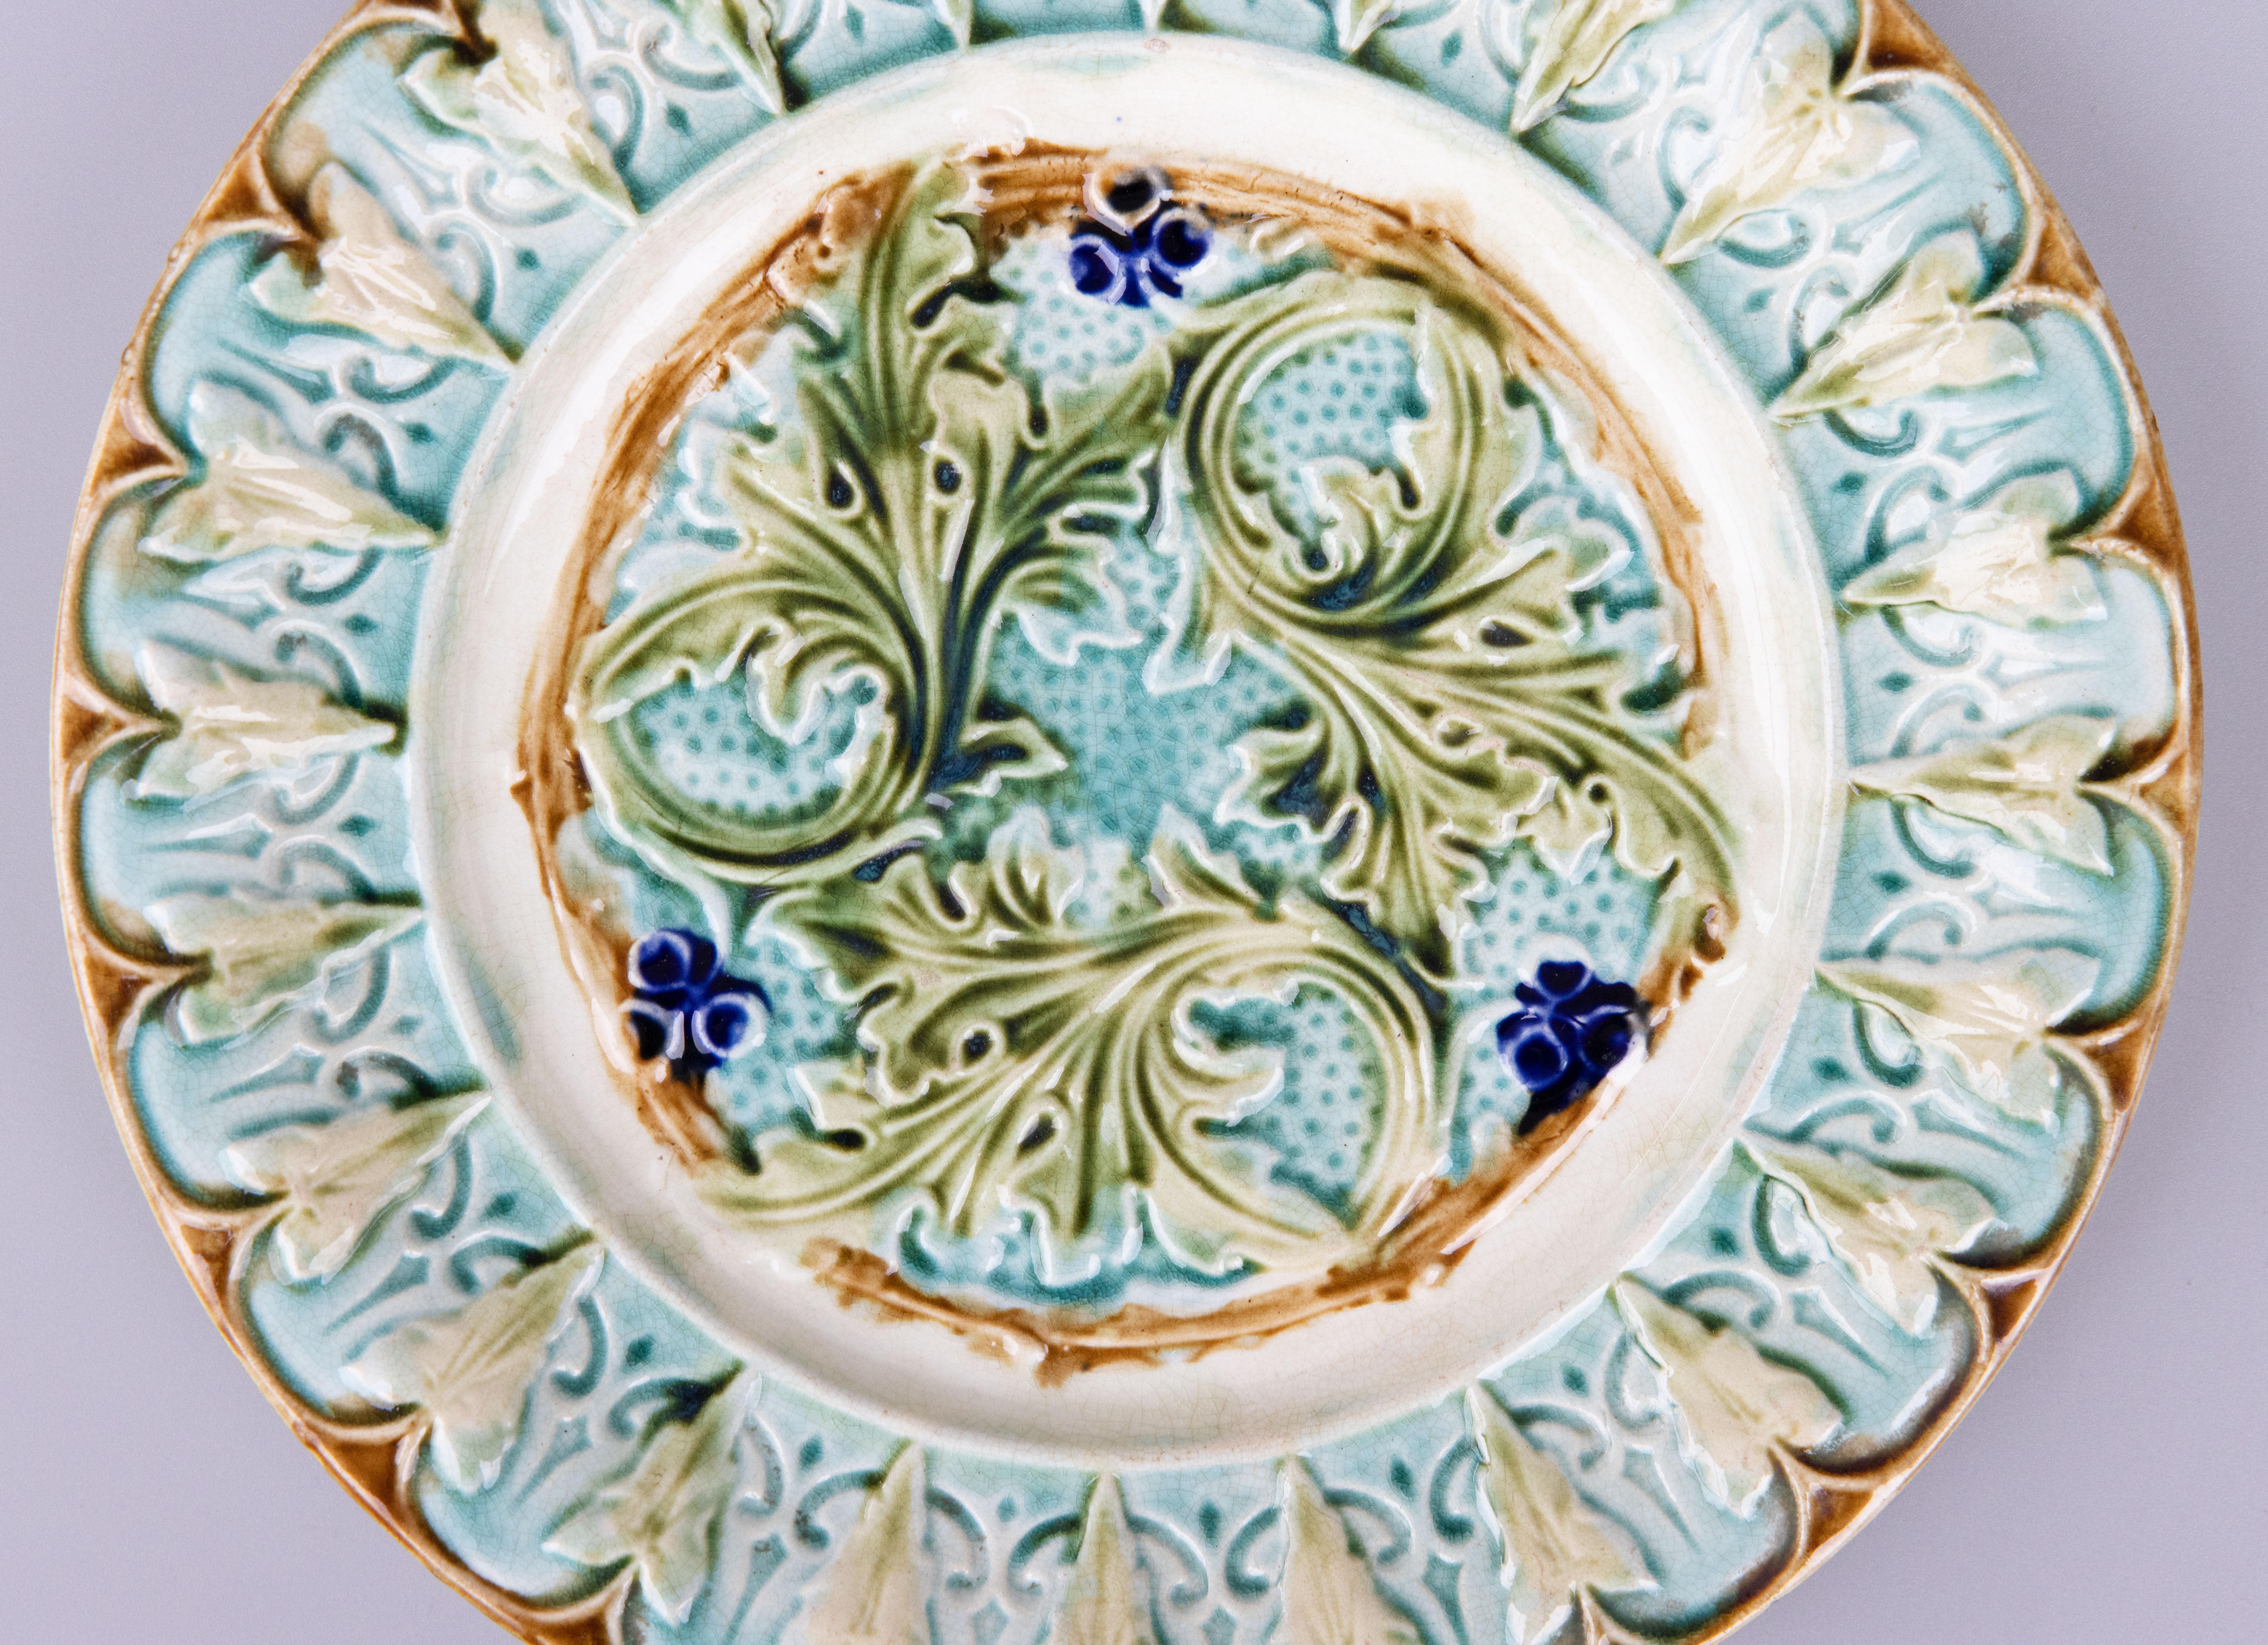 A lovely antique 19th century French Majolica acanthus leaves & ivy plate, circa 1880. This gorgeous plate has hand painted light green acanthus leaves and ivy on a soft turquoise / aqua blue background. The colors are stunning! It would be lovely